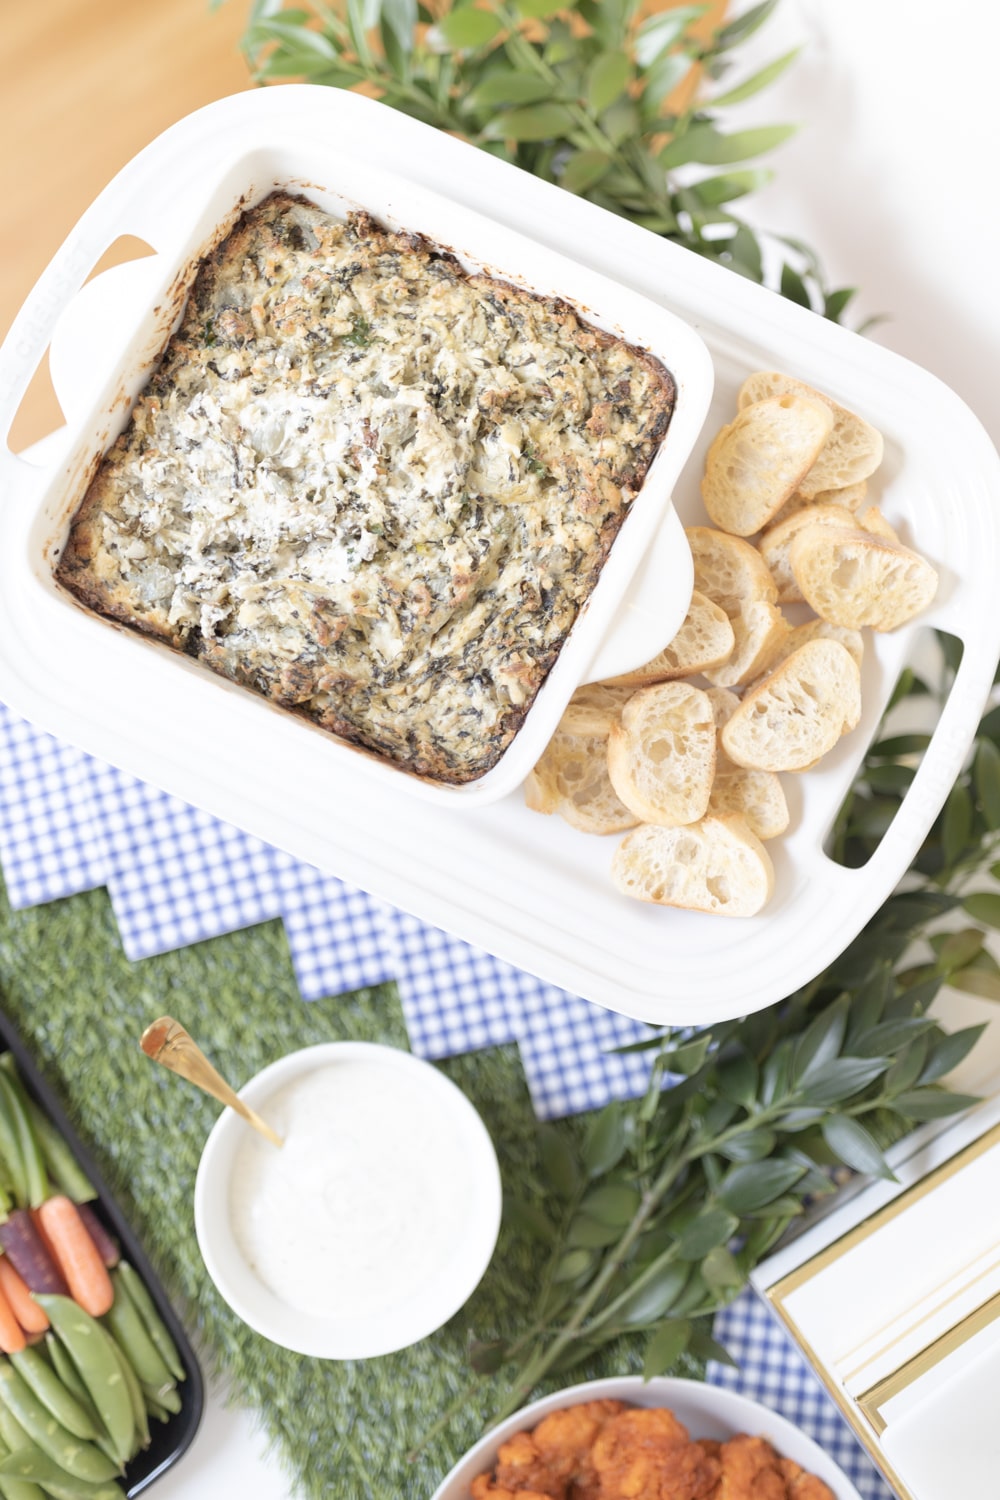 Baked spinach dip made by blogger Stephanie Ziajka on Diary of a Debutante